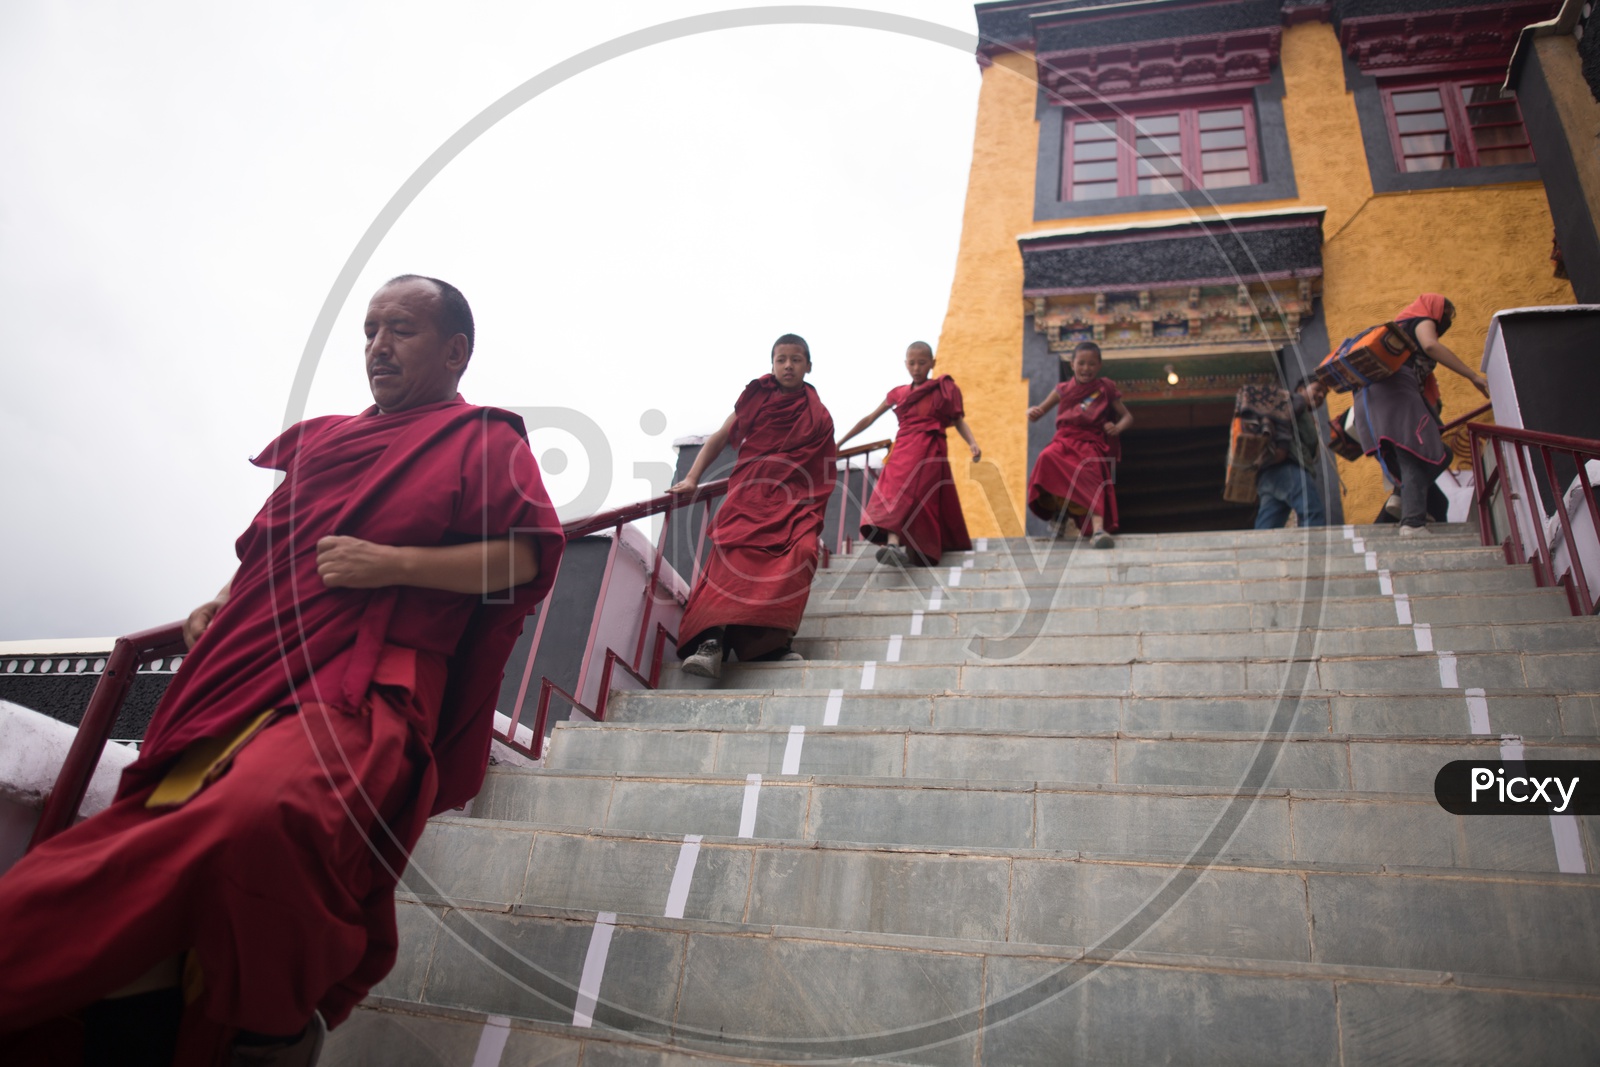 Buddhist Monks coming out of a monastery